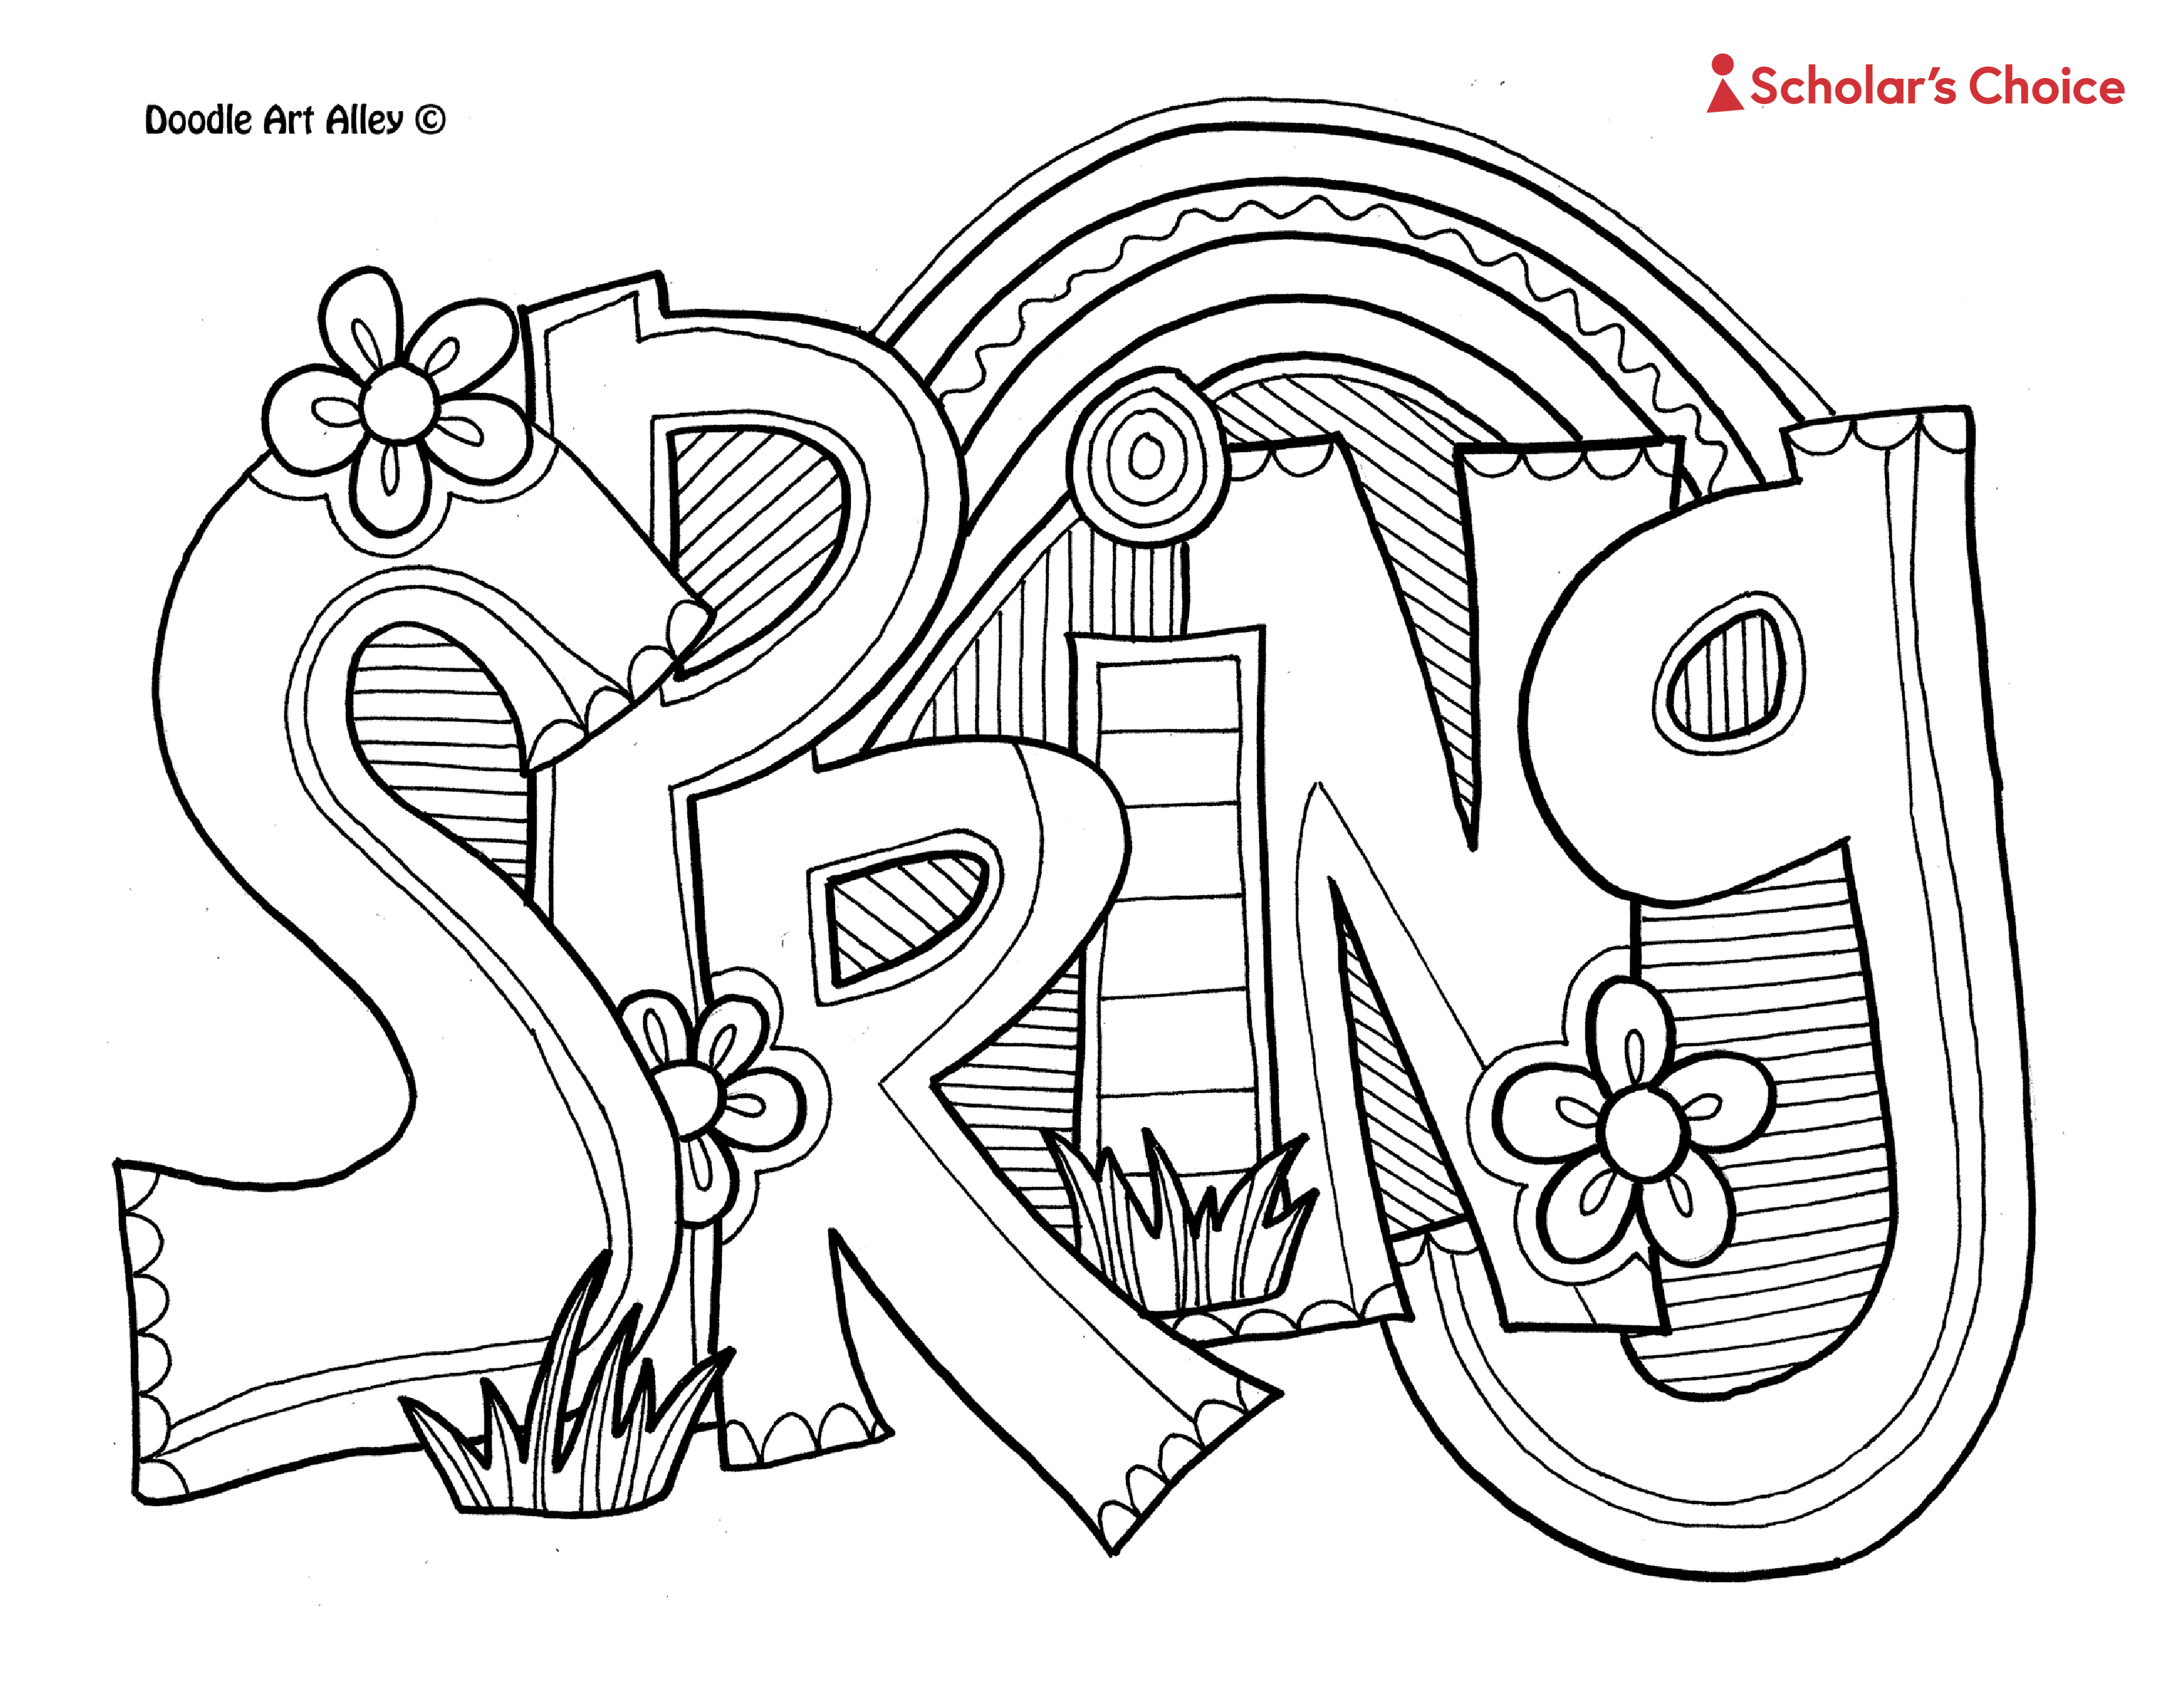 spring-downloads_colouring-07